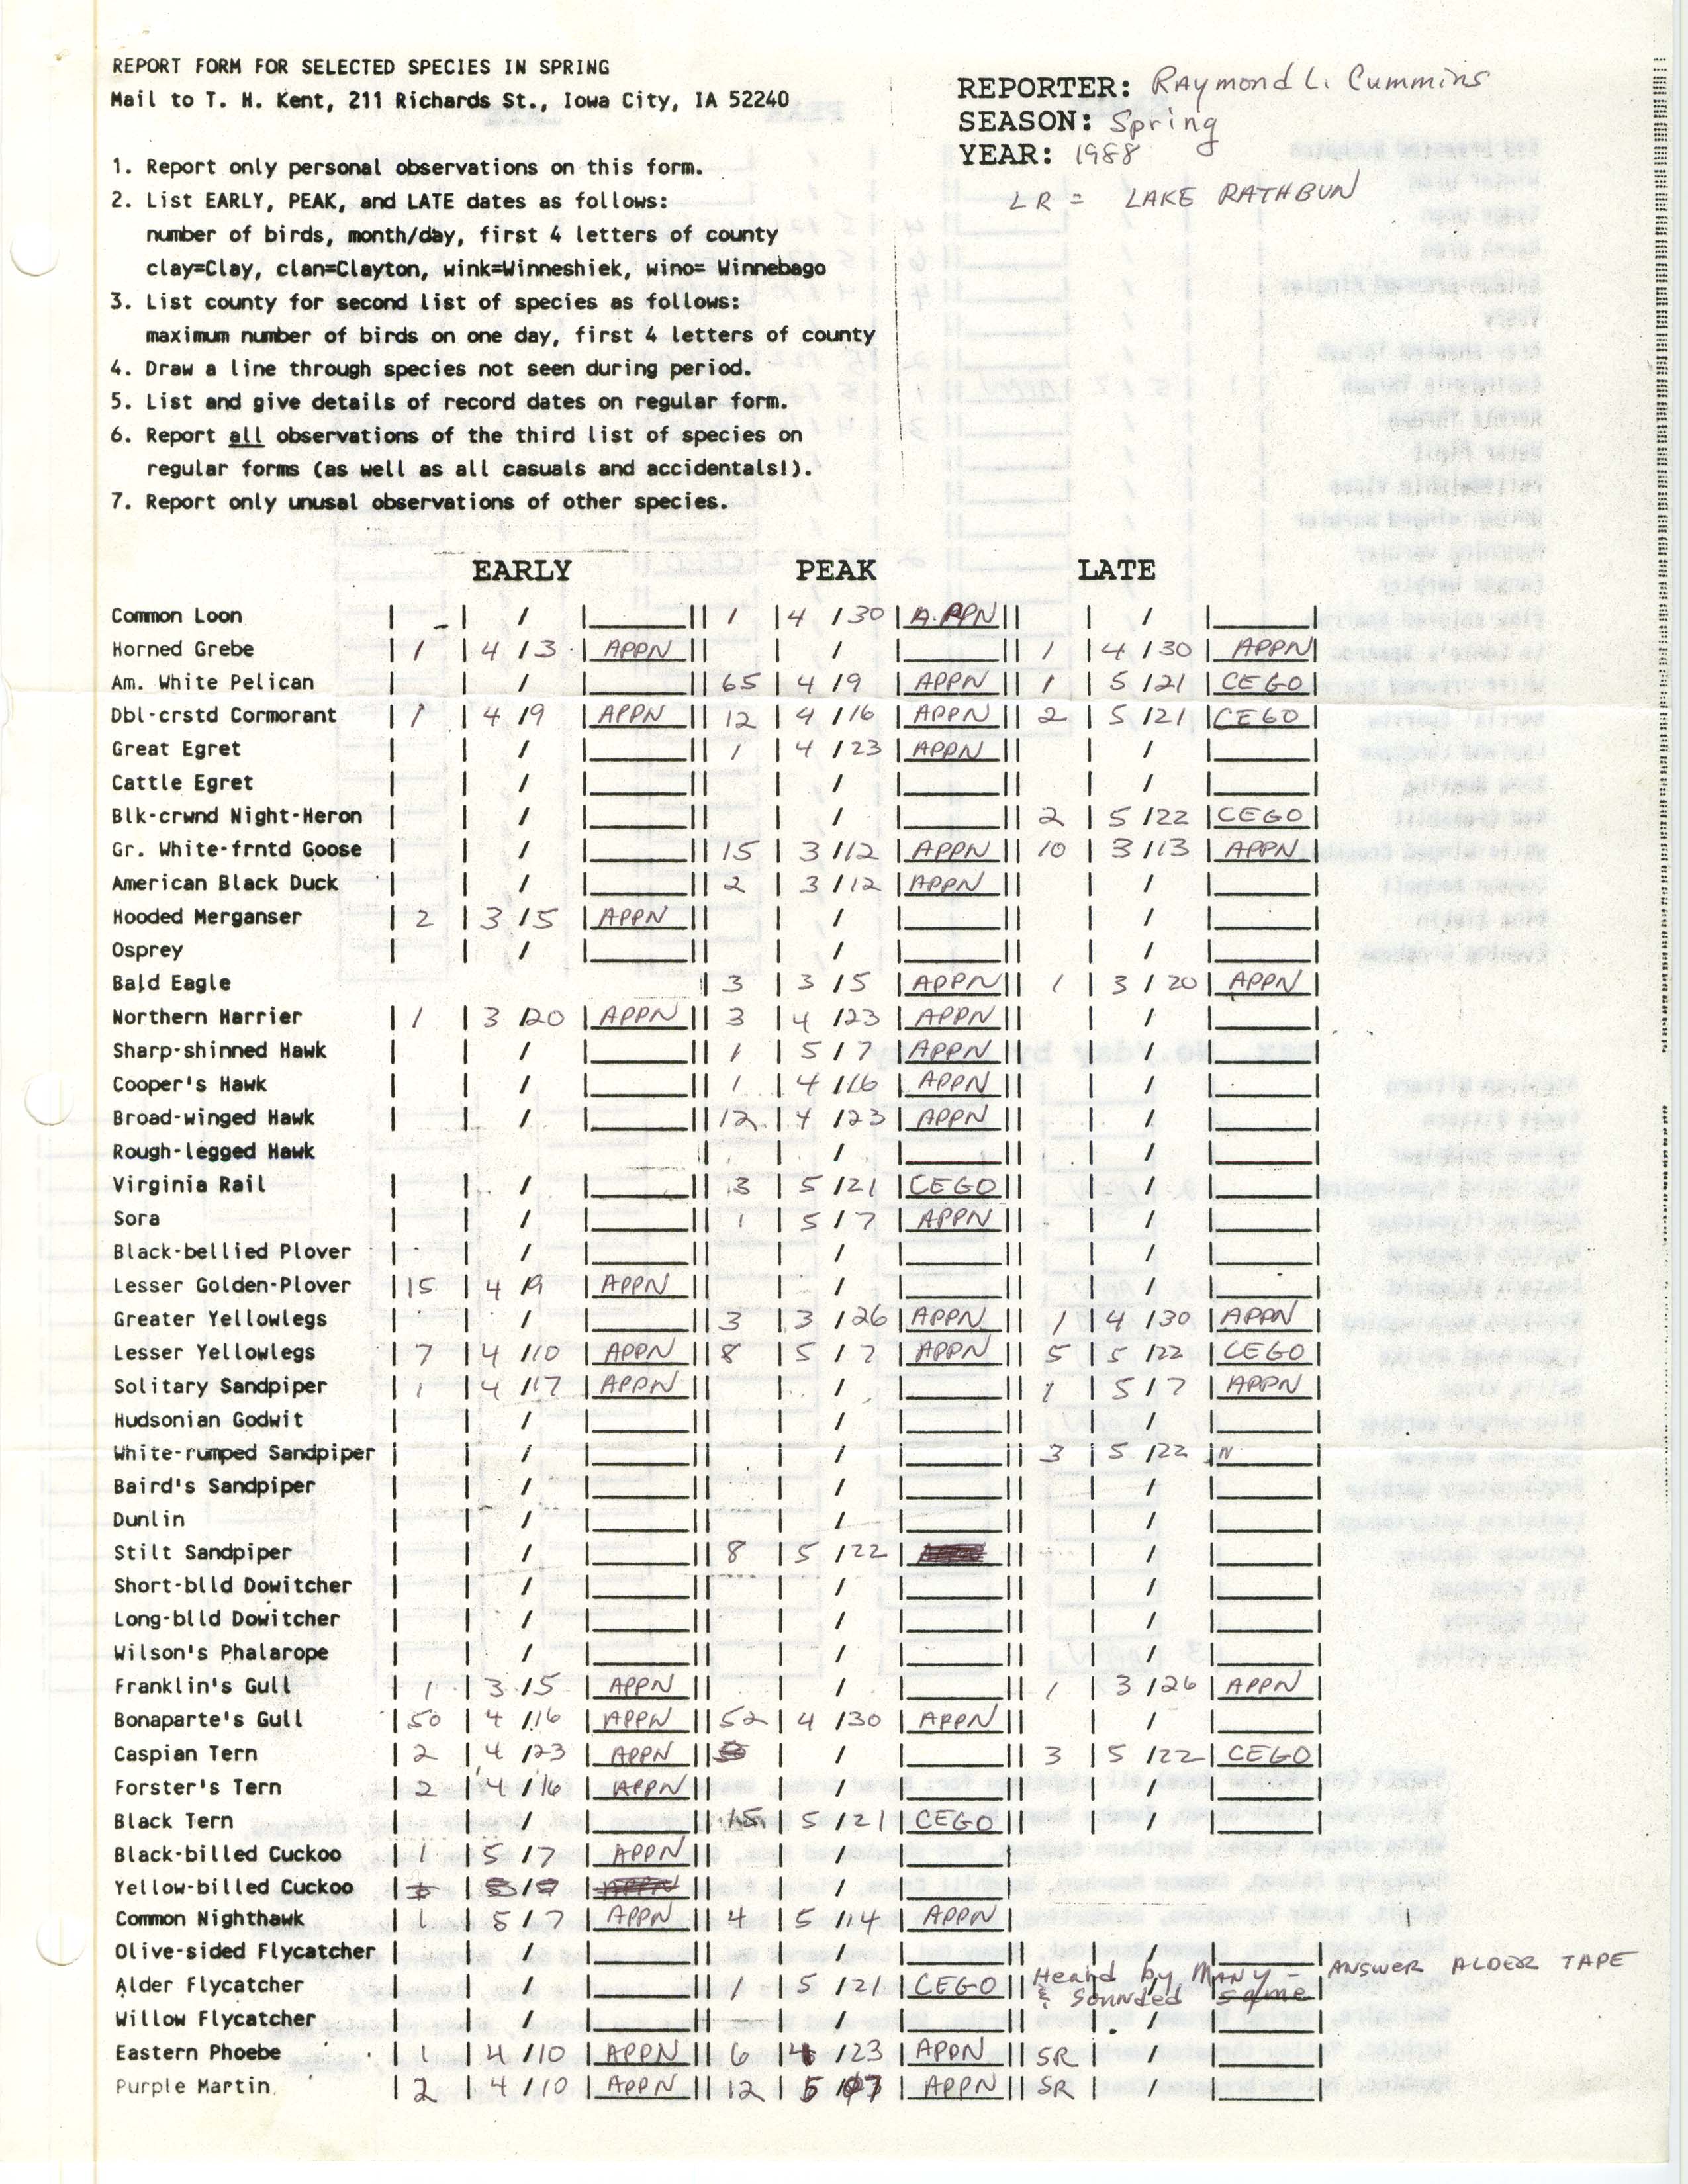 Report form for selected species in spring, contributed by Raymond L. Cummins, spring 1988